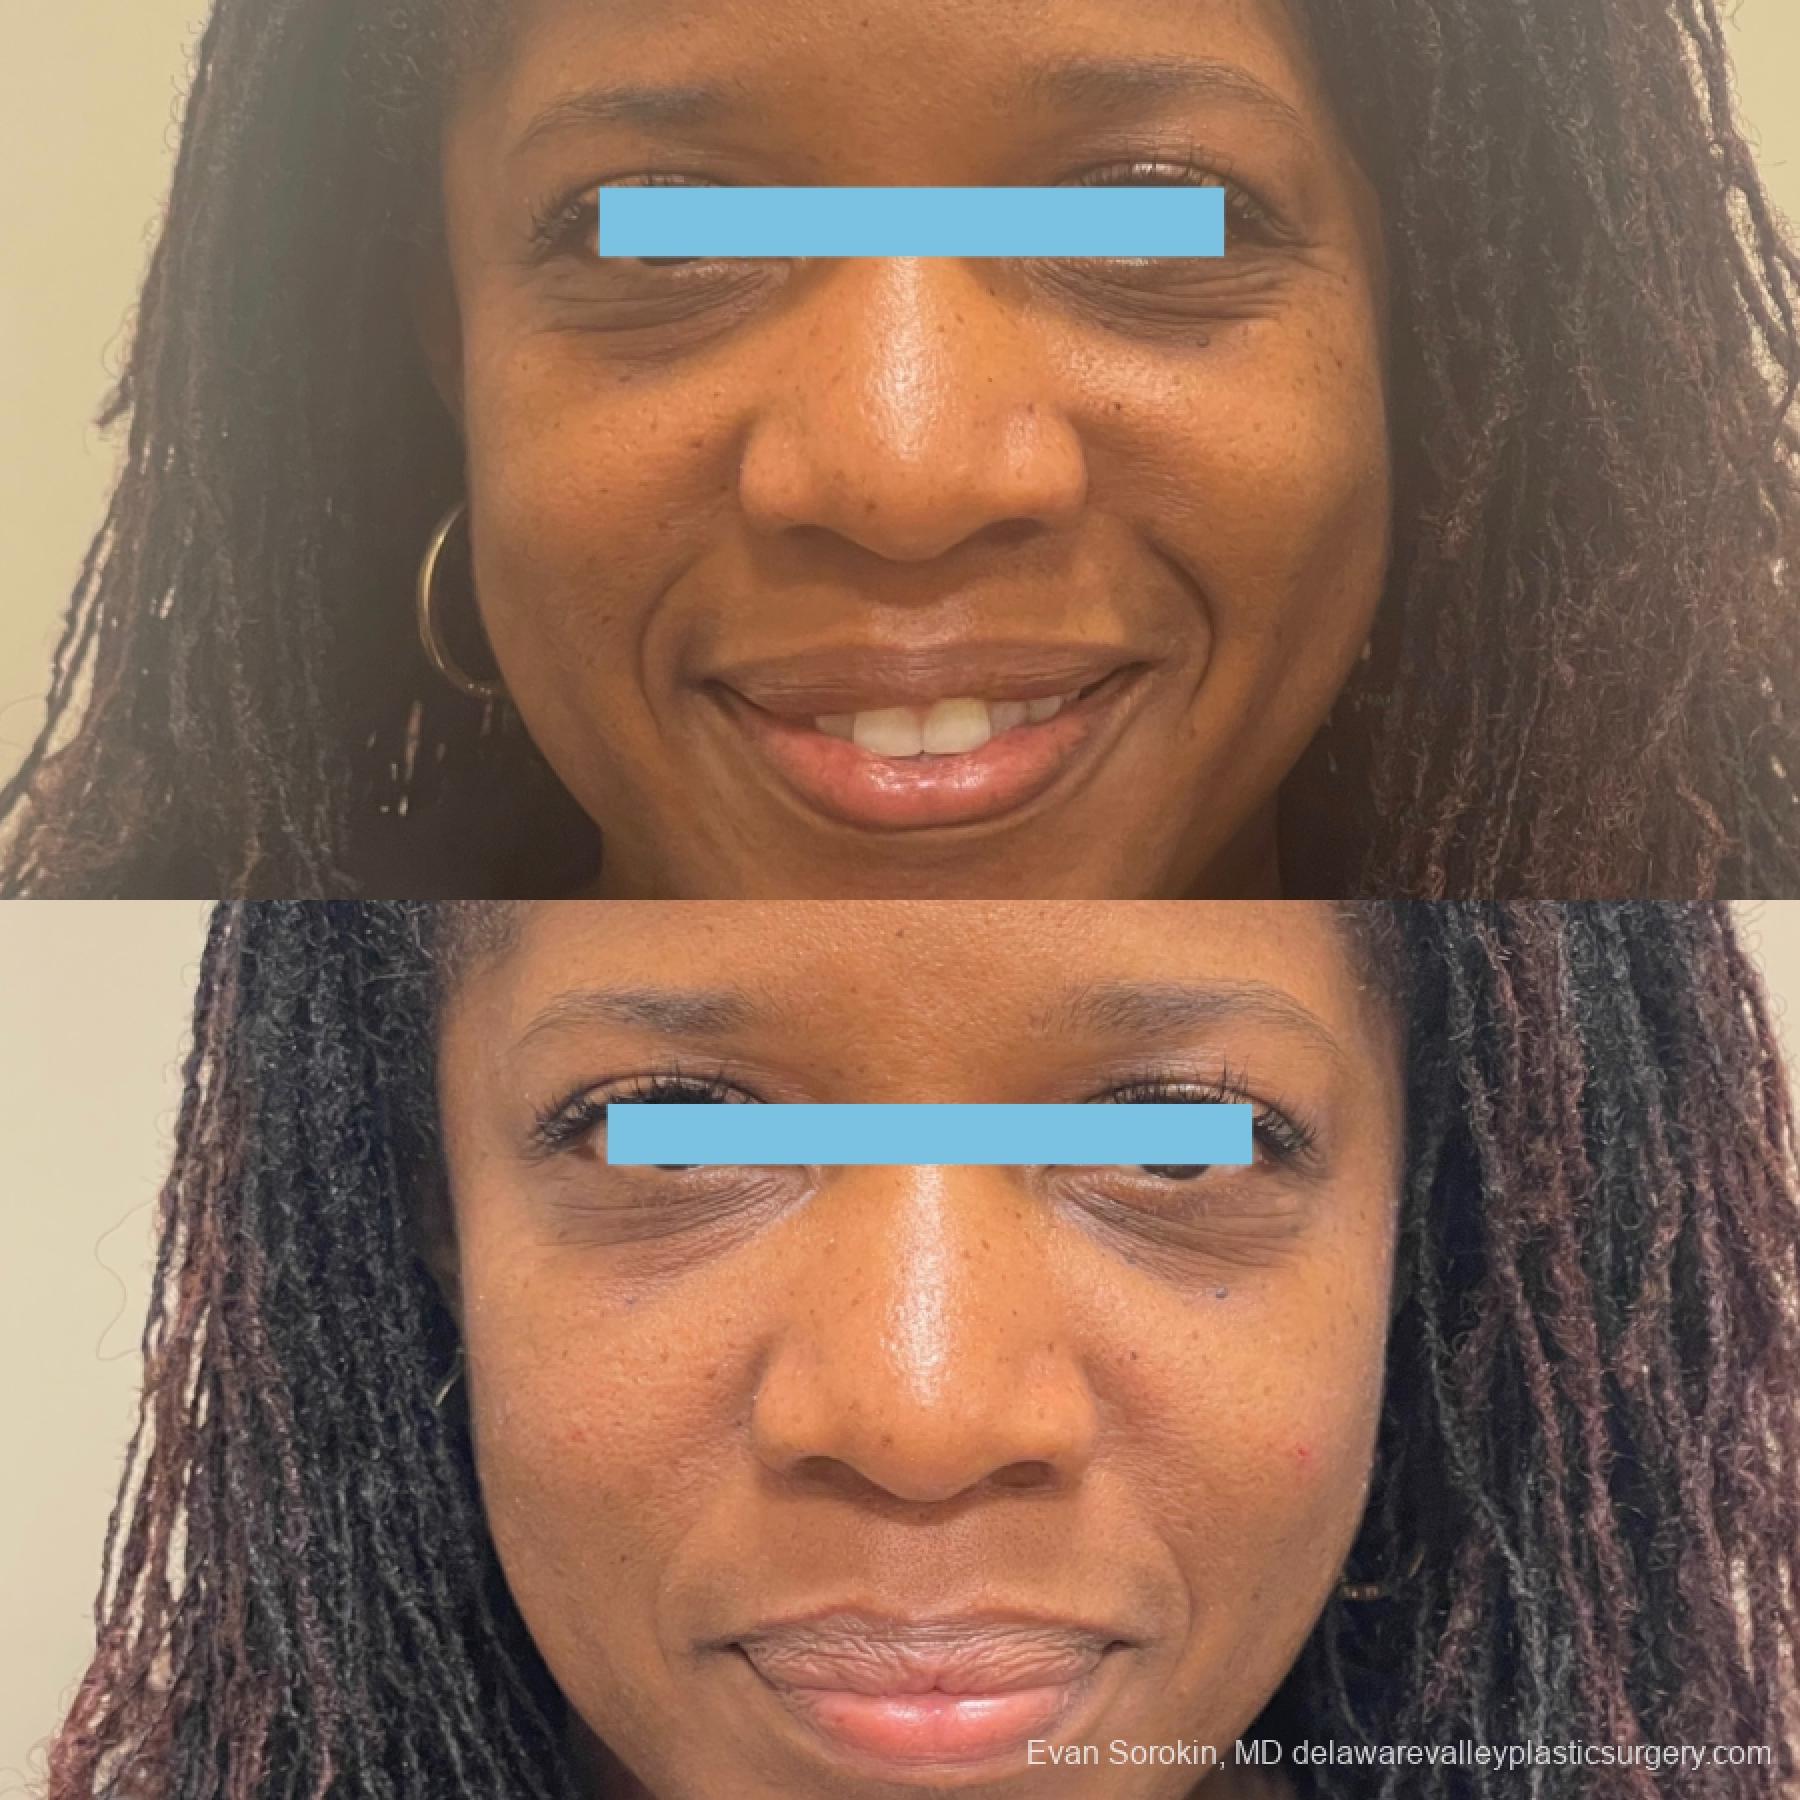 Fillers: Patient 1 - Before and After 1